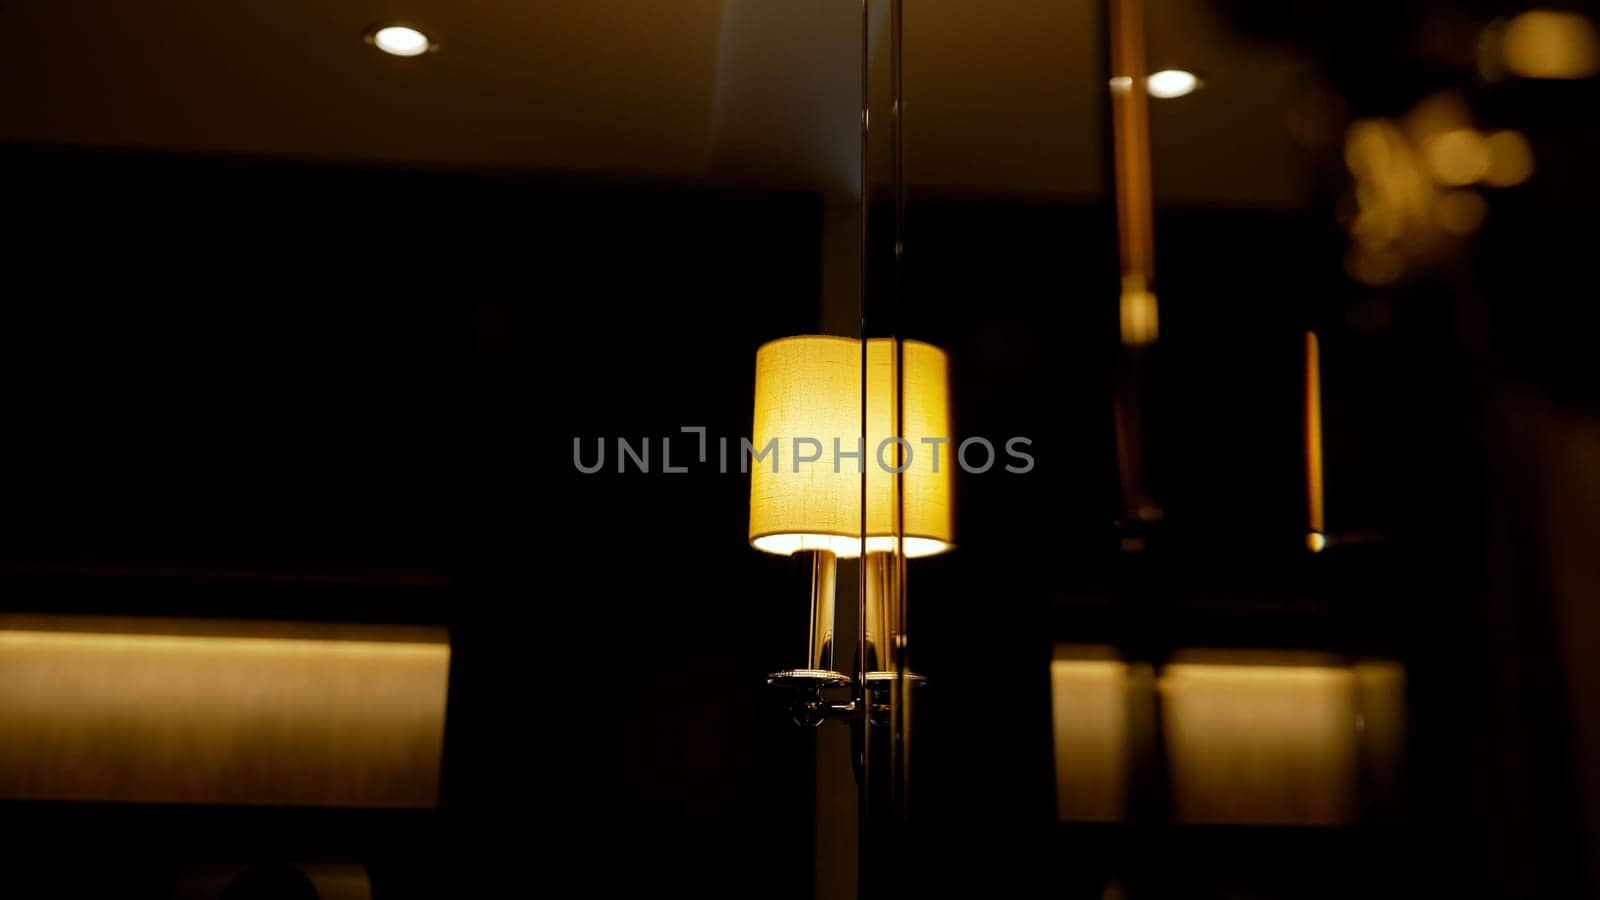 Lamp - a lamp on the wall, close-up. Lamp on the wall. Close-up of a bright lamp on the wall in a luxury hotel. Wall lamp in a hotel room. by Rusrussid